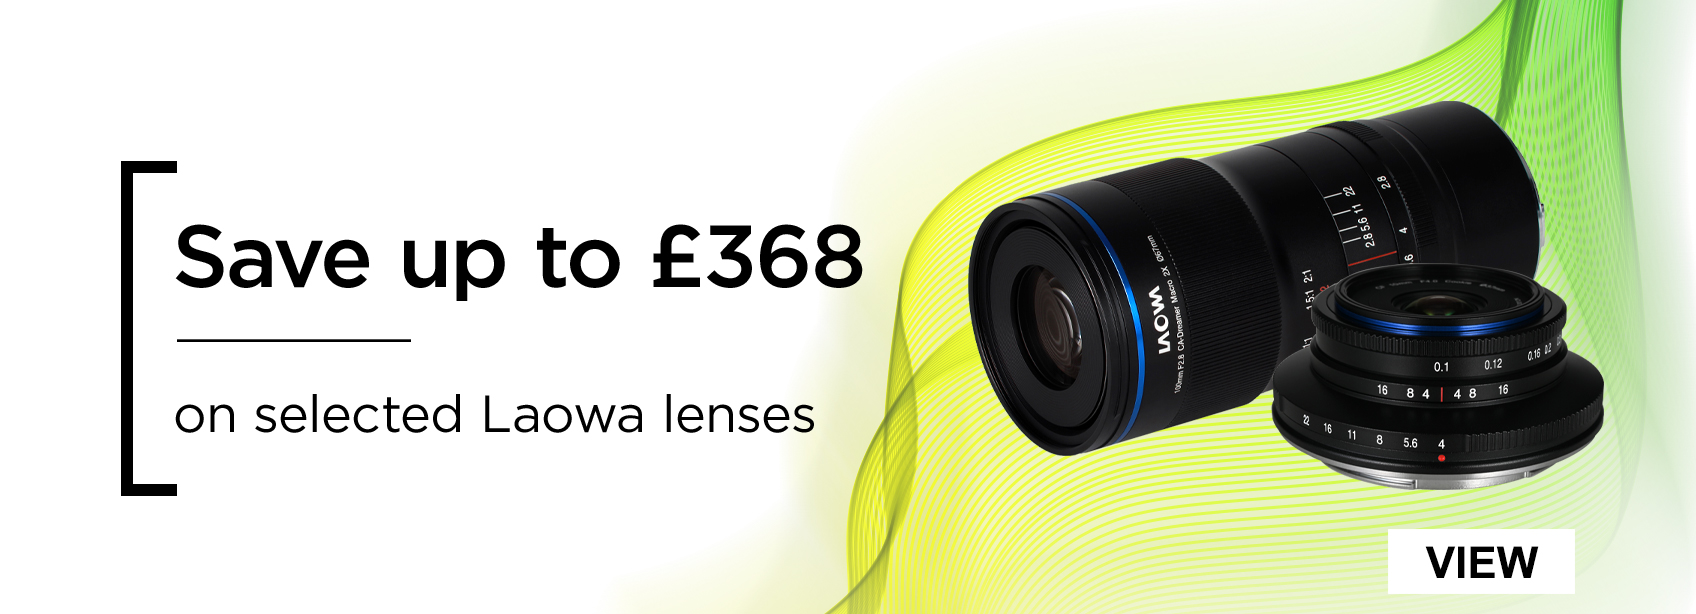 Save up to £368 - on selected Laowa lenses